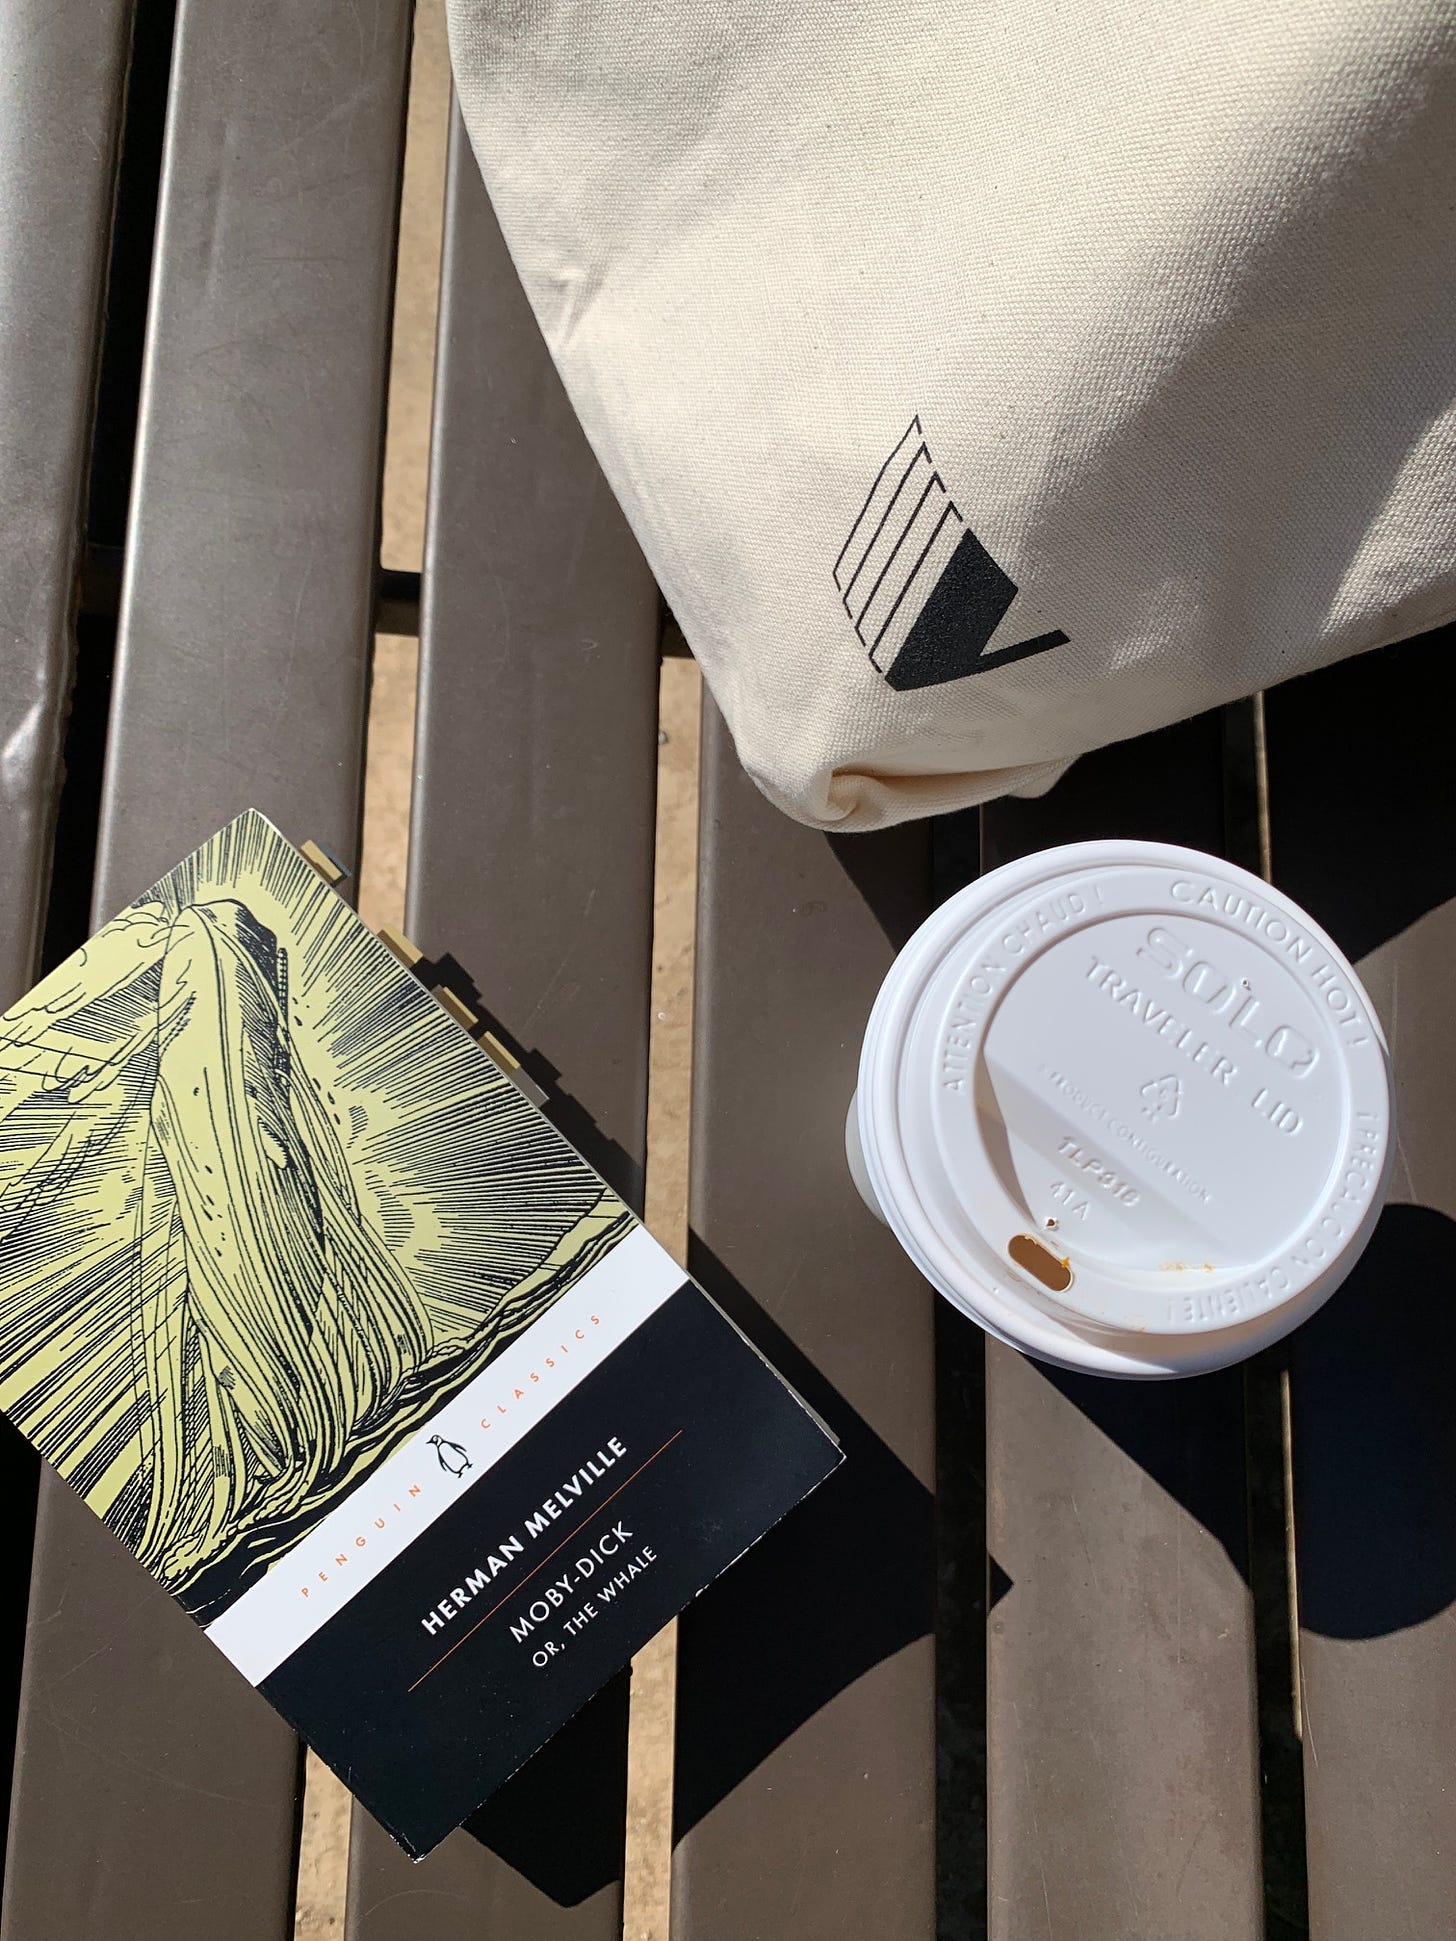 a copy of Moby Dick sits on a bench, next to a coffee cup and a tote bag.